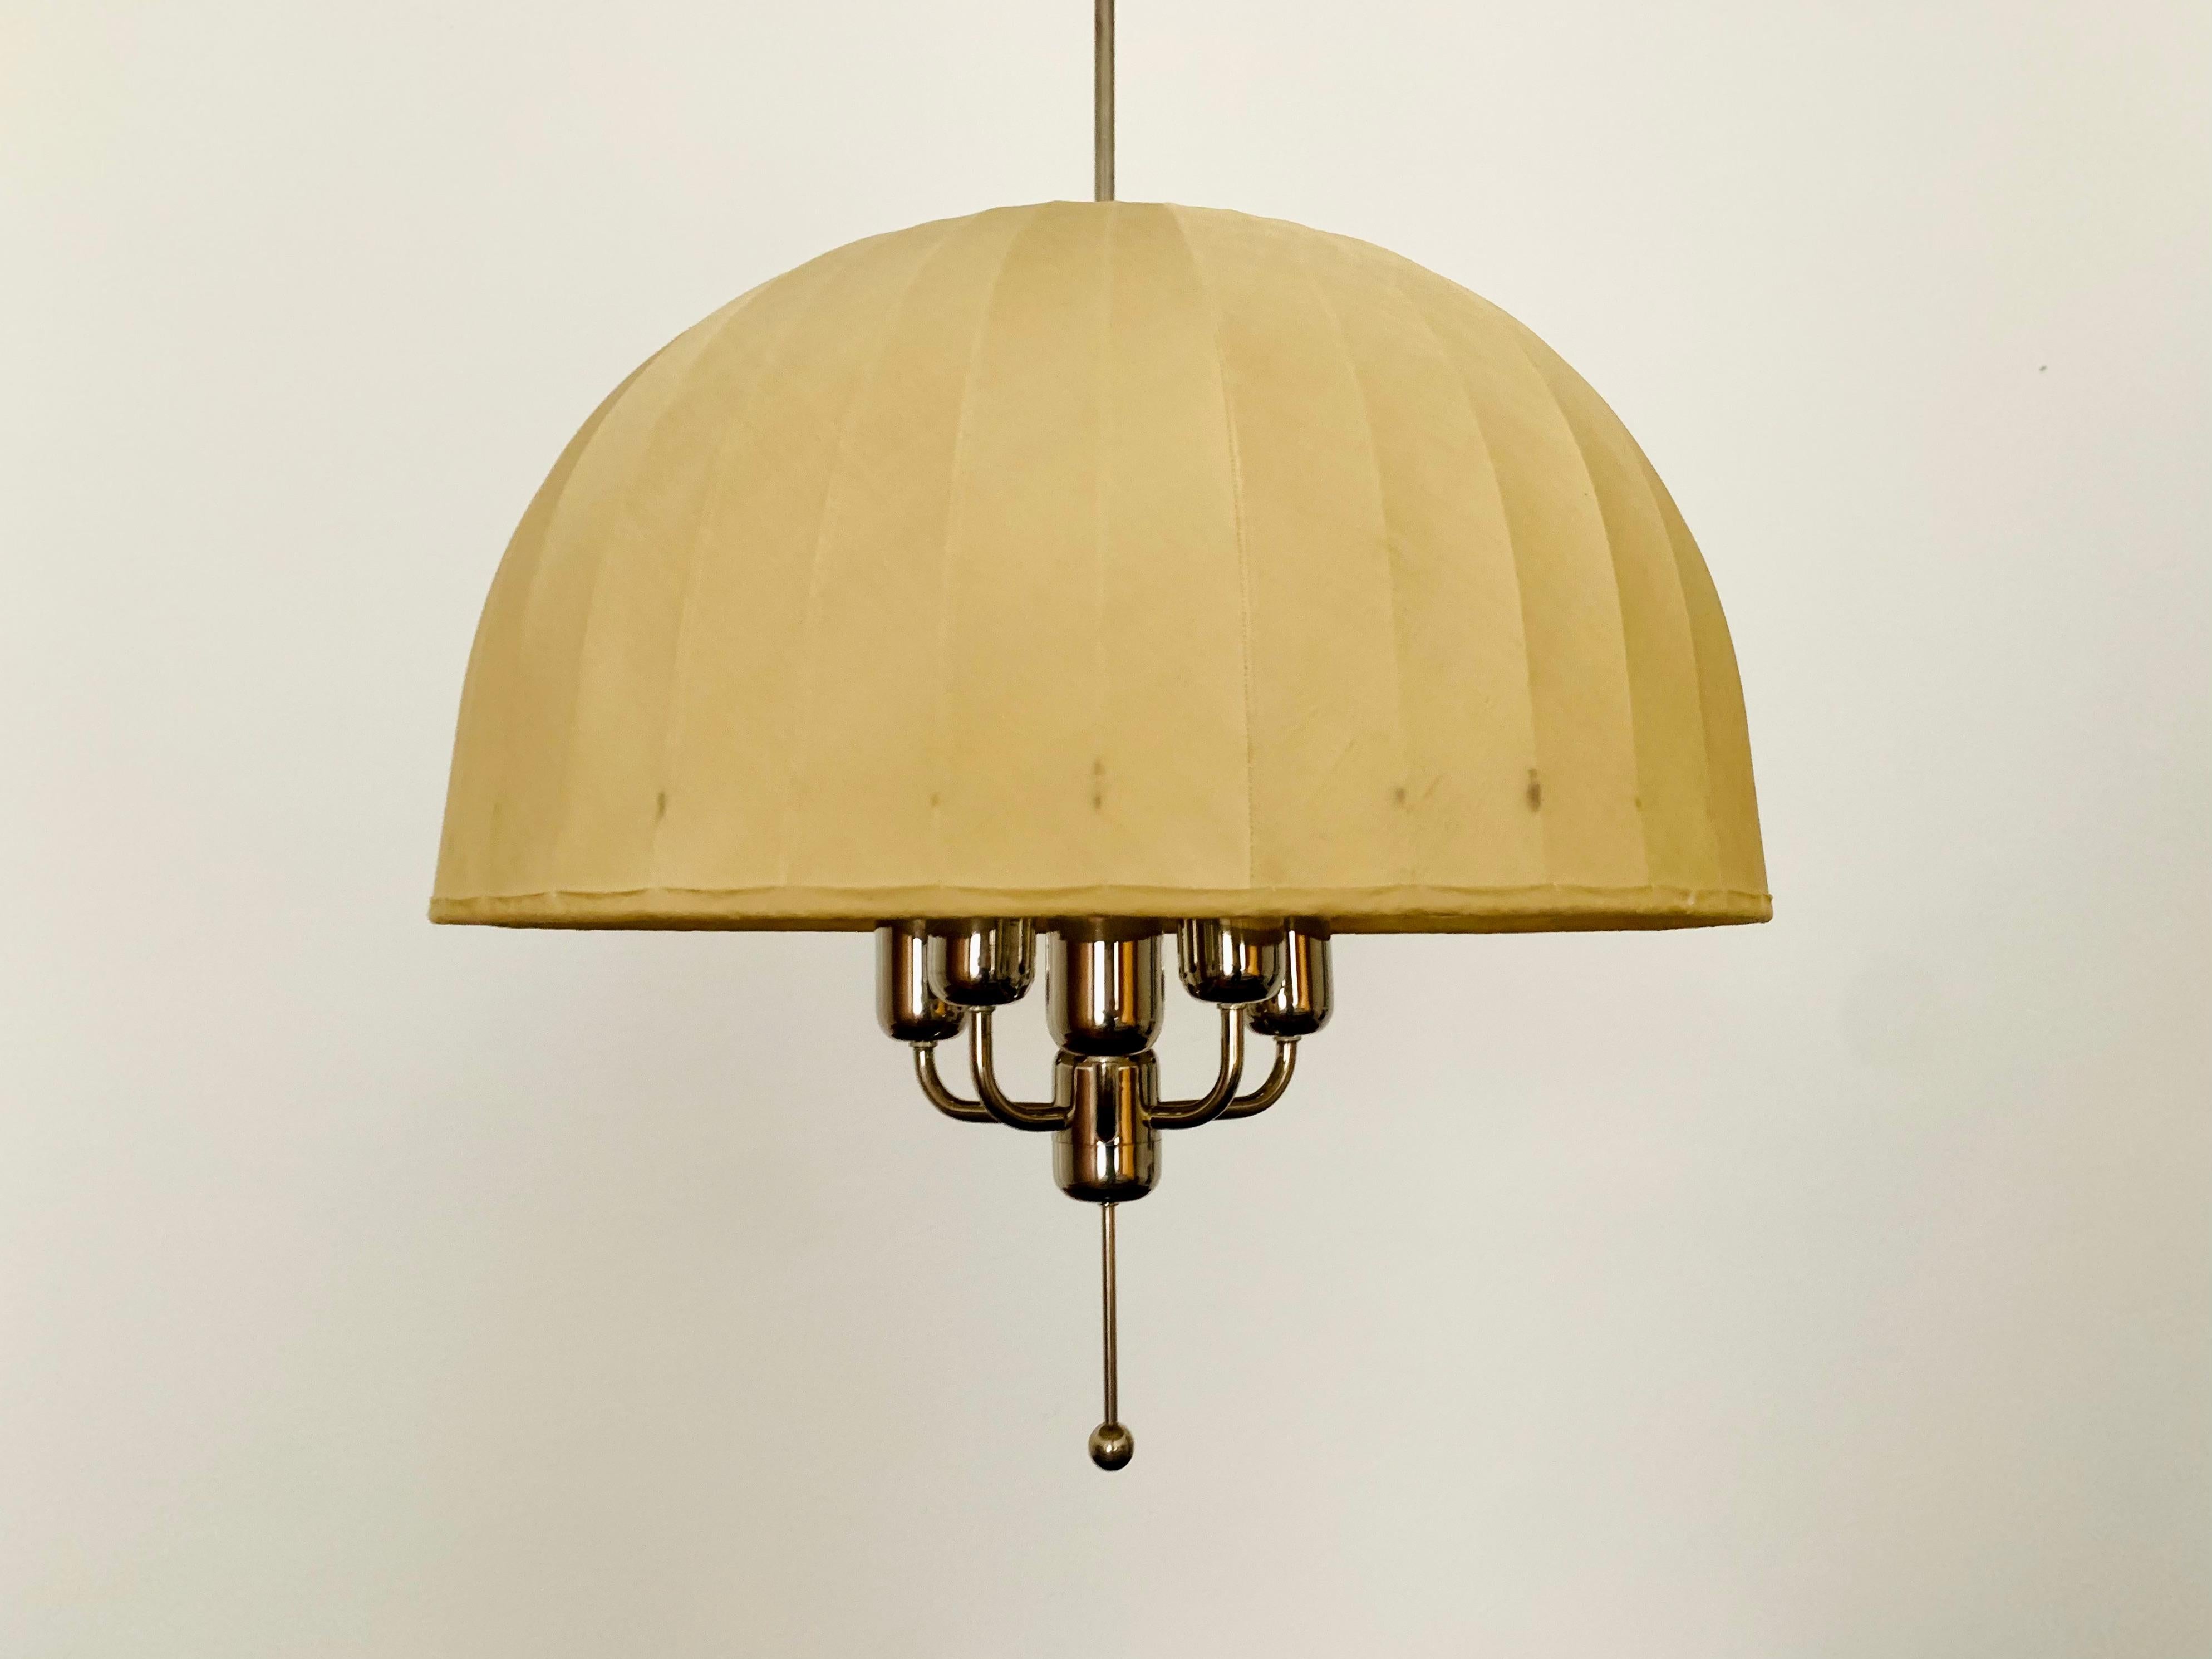 Wonderful and very rare Swedish pendant lamp from the 1960s.
The lamp with the floating shade is a real asset and an absolute favorite for every home.
A very pleasant and warm light is created.

Manufacturer: Markaryd AB Ellysett
Design: Hans